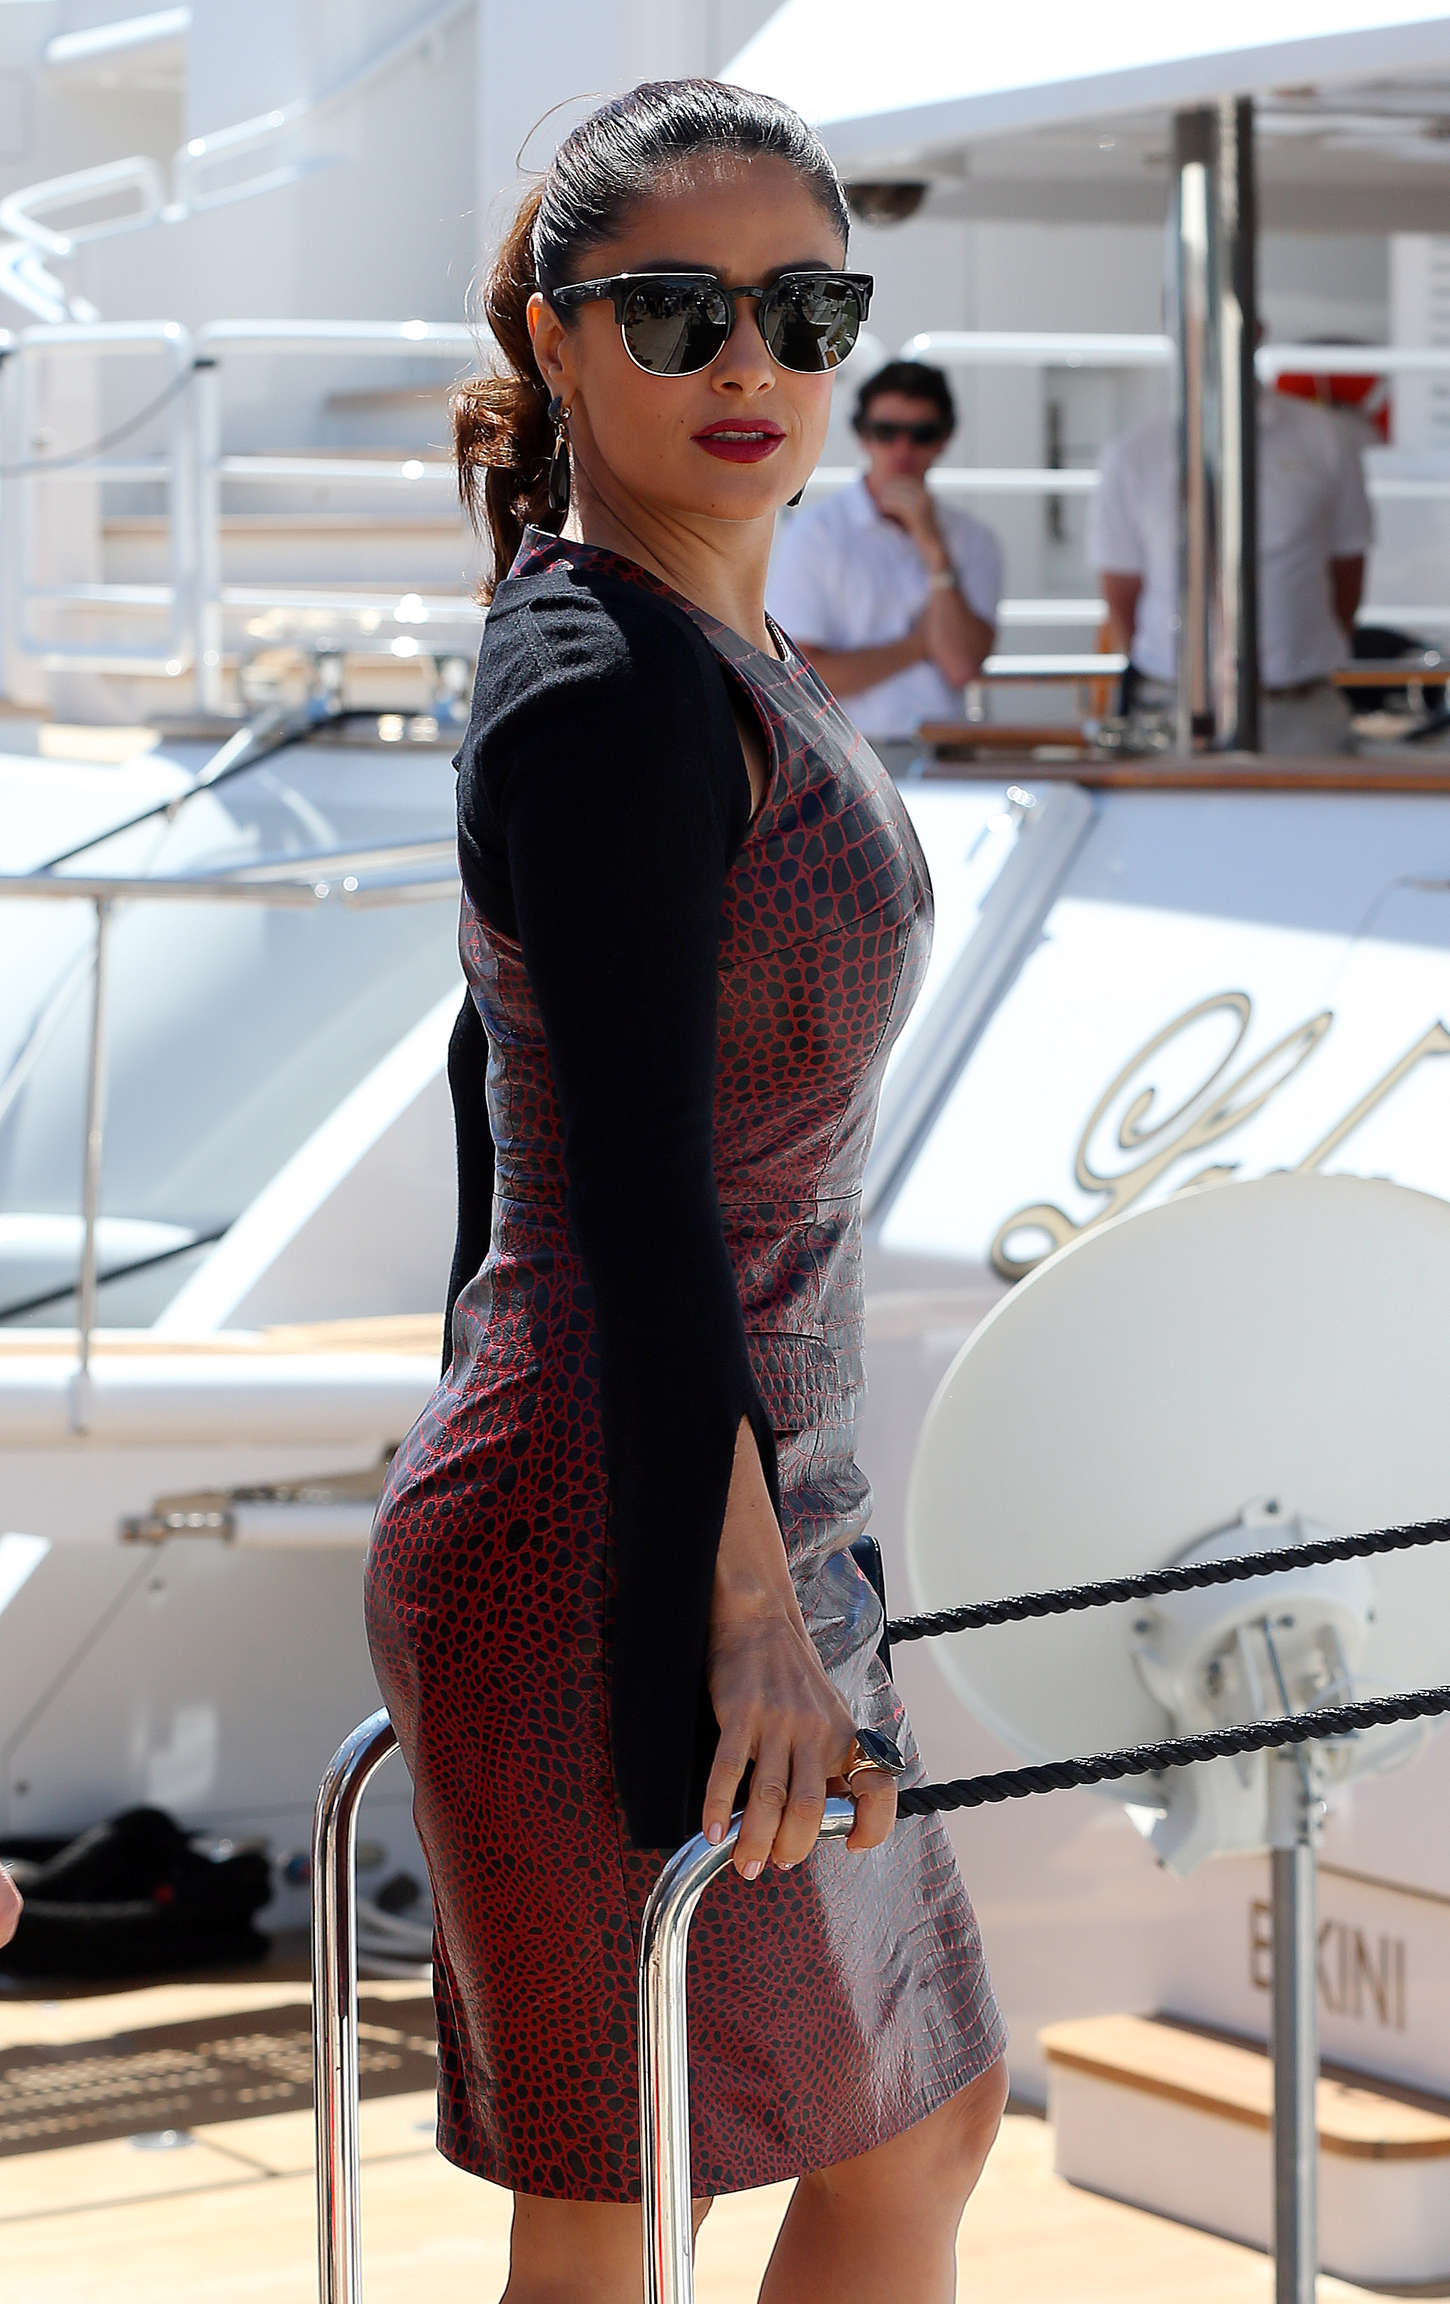 Salma Hayek arriving for a boat party in Cannes Harbour